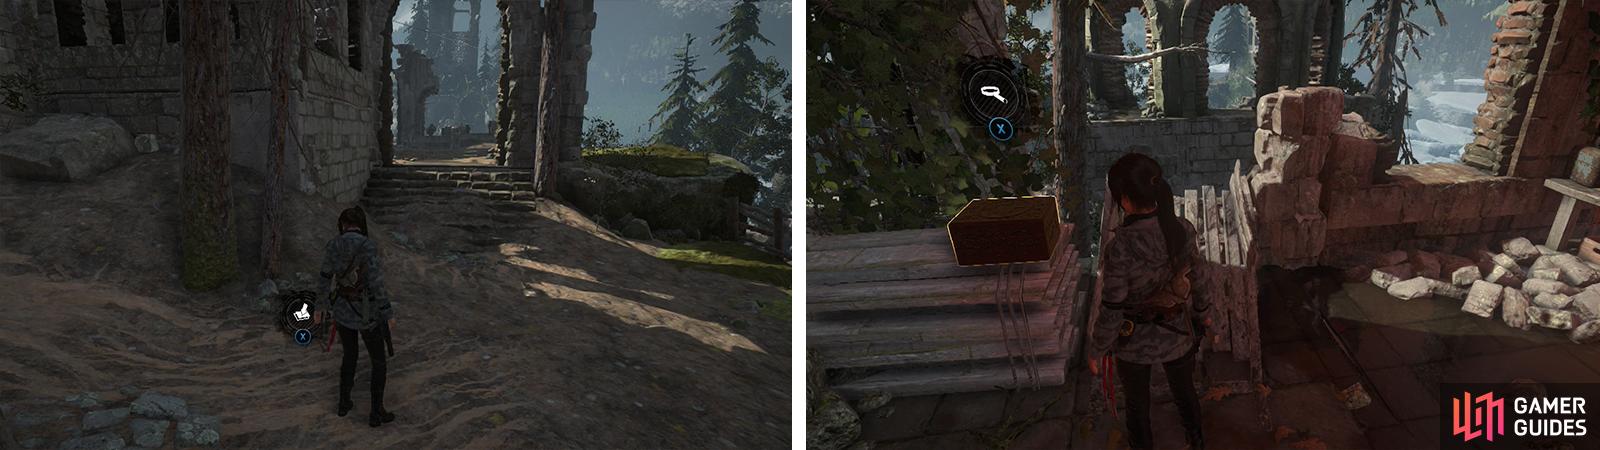 Between the sets of curved stairs you’ll find Survival Cache 10 (left). At the top of the large ruin is Relic 05 (right).